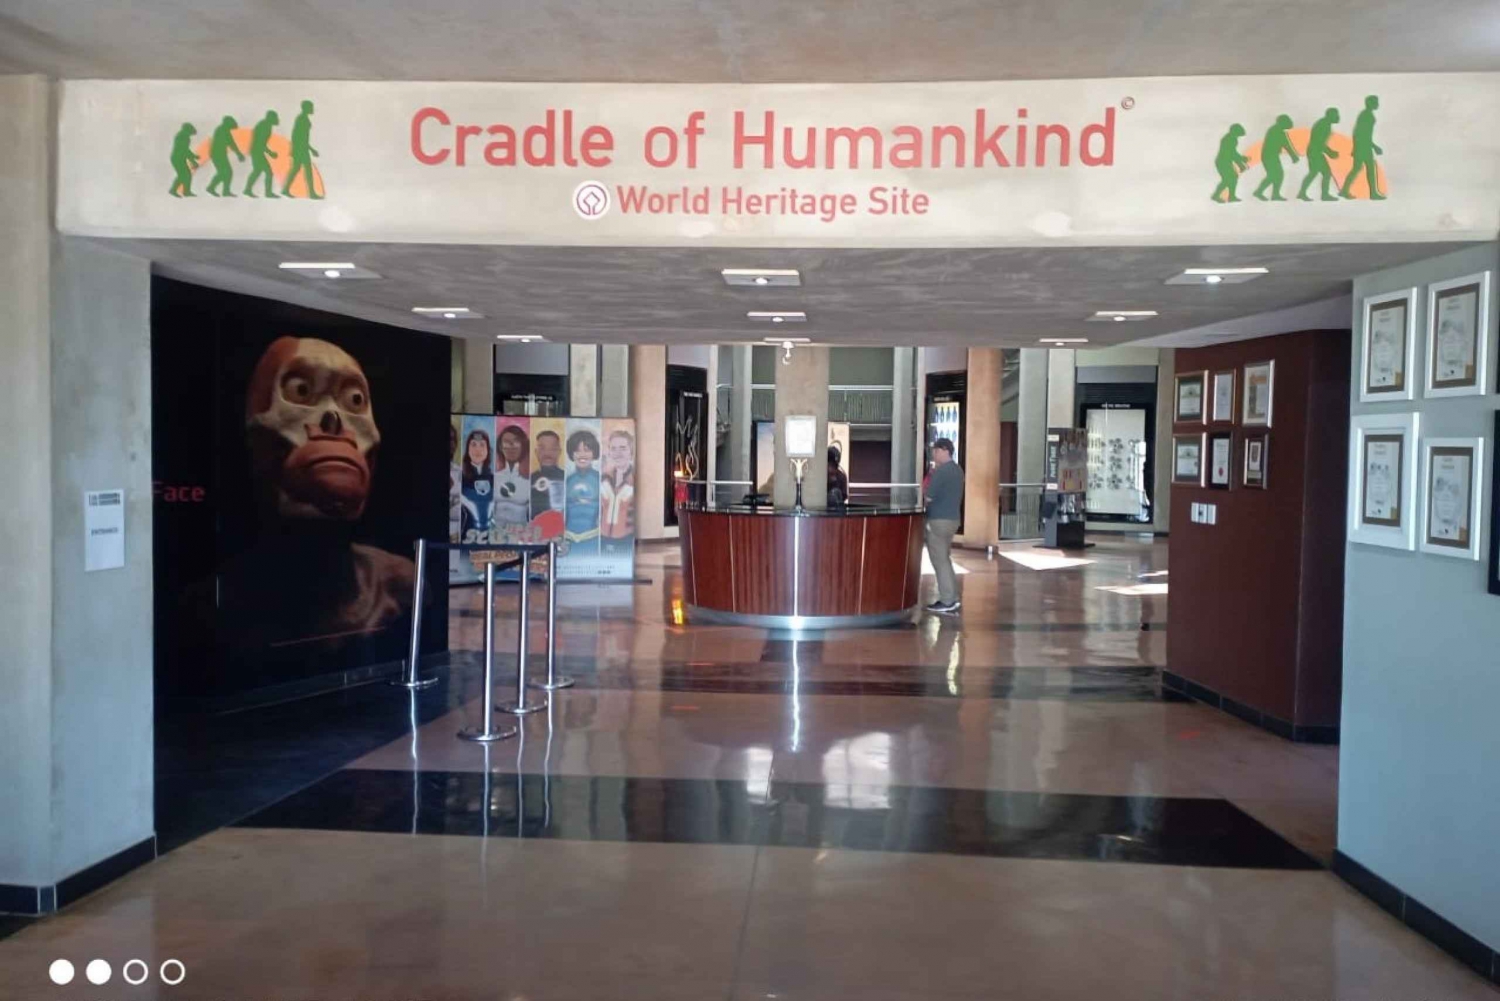 Lesedi Cultural Village and Cradle of Humankind